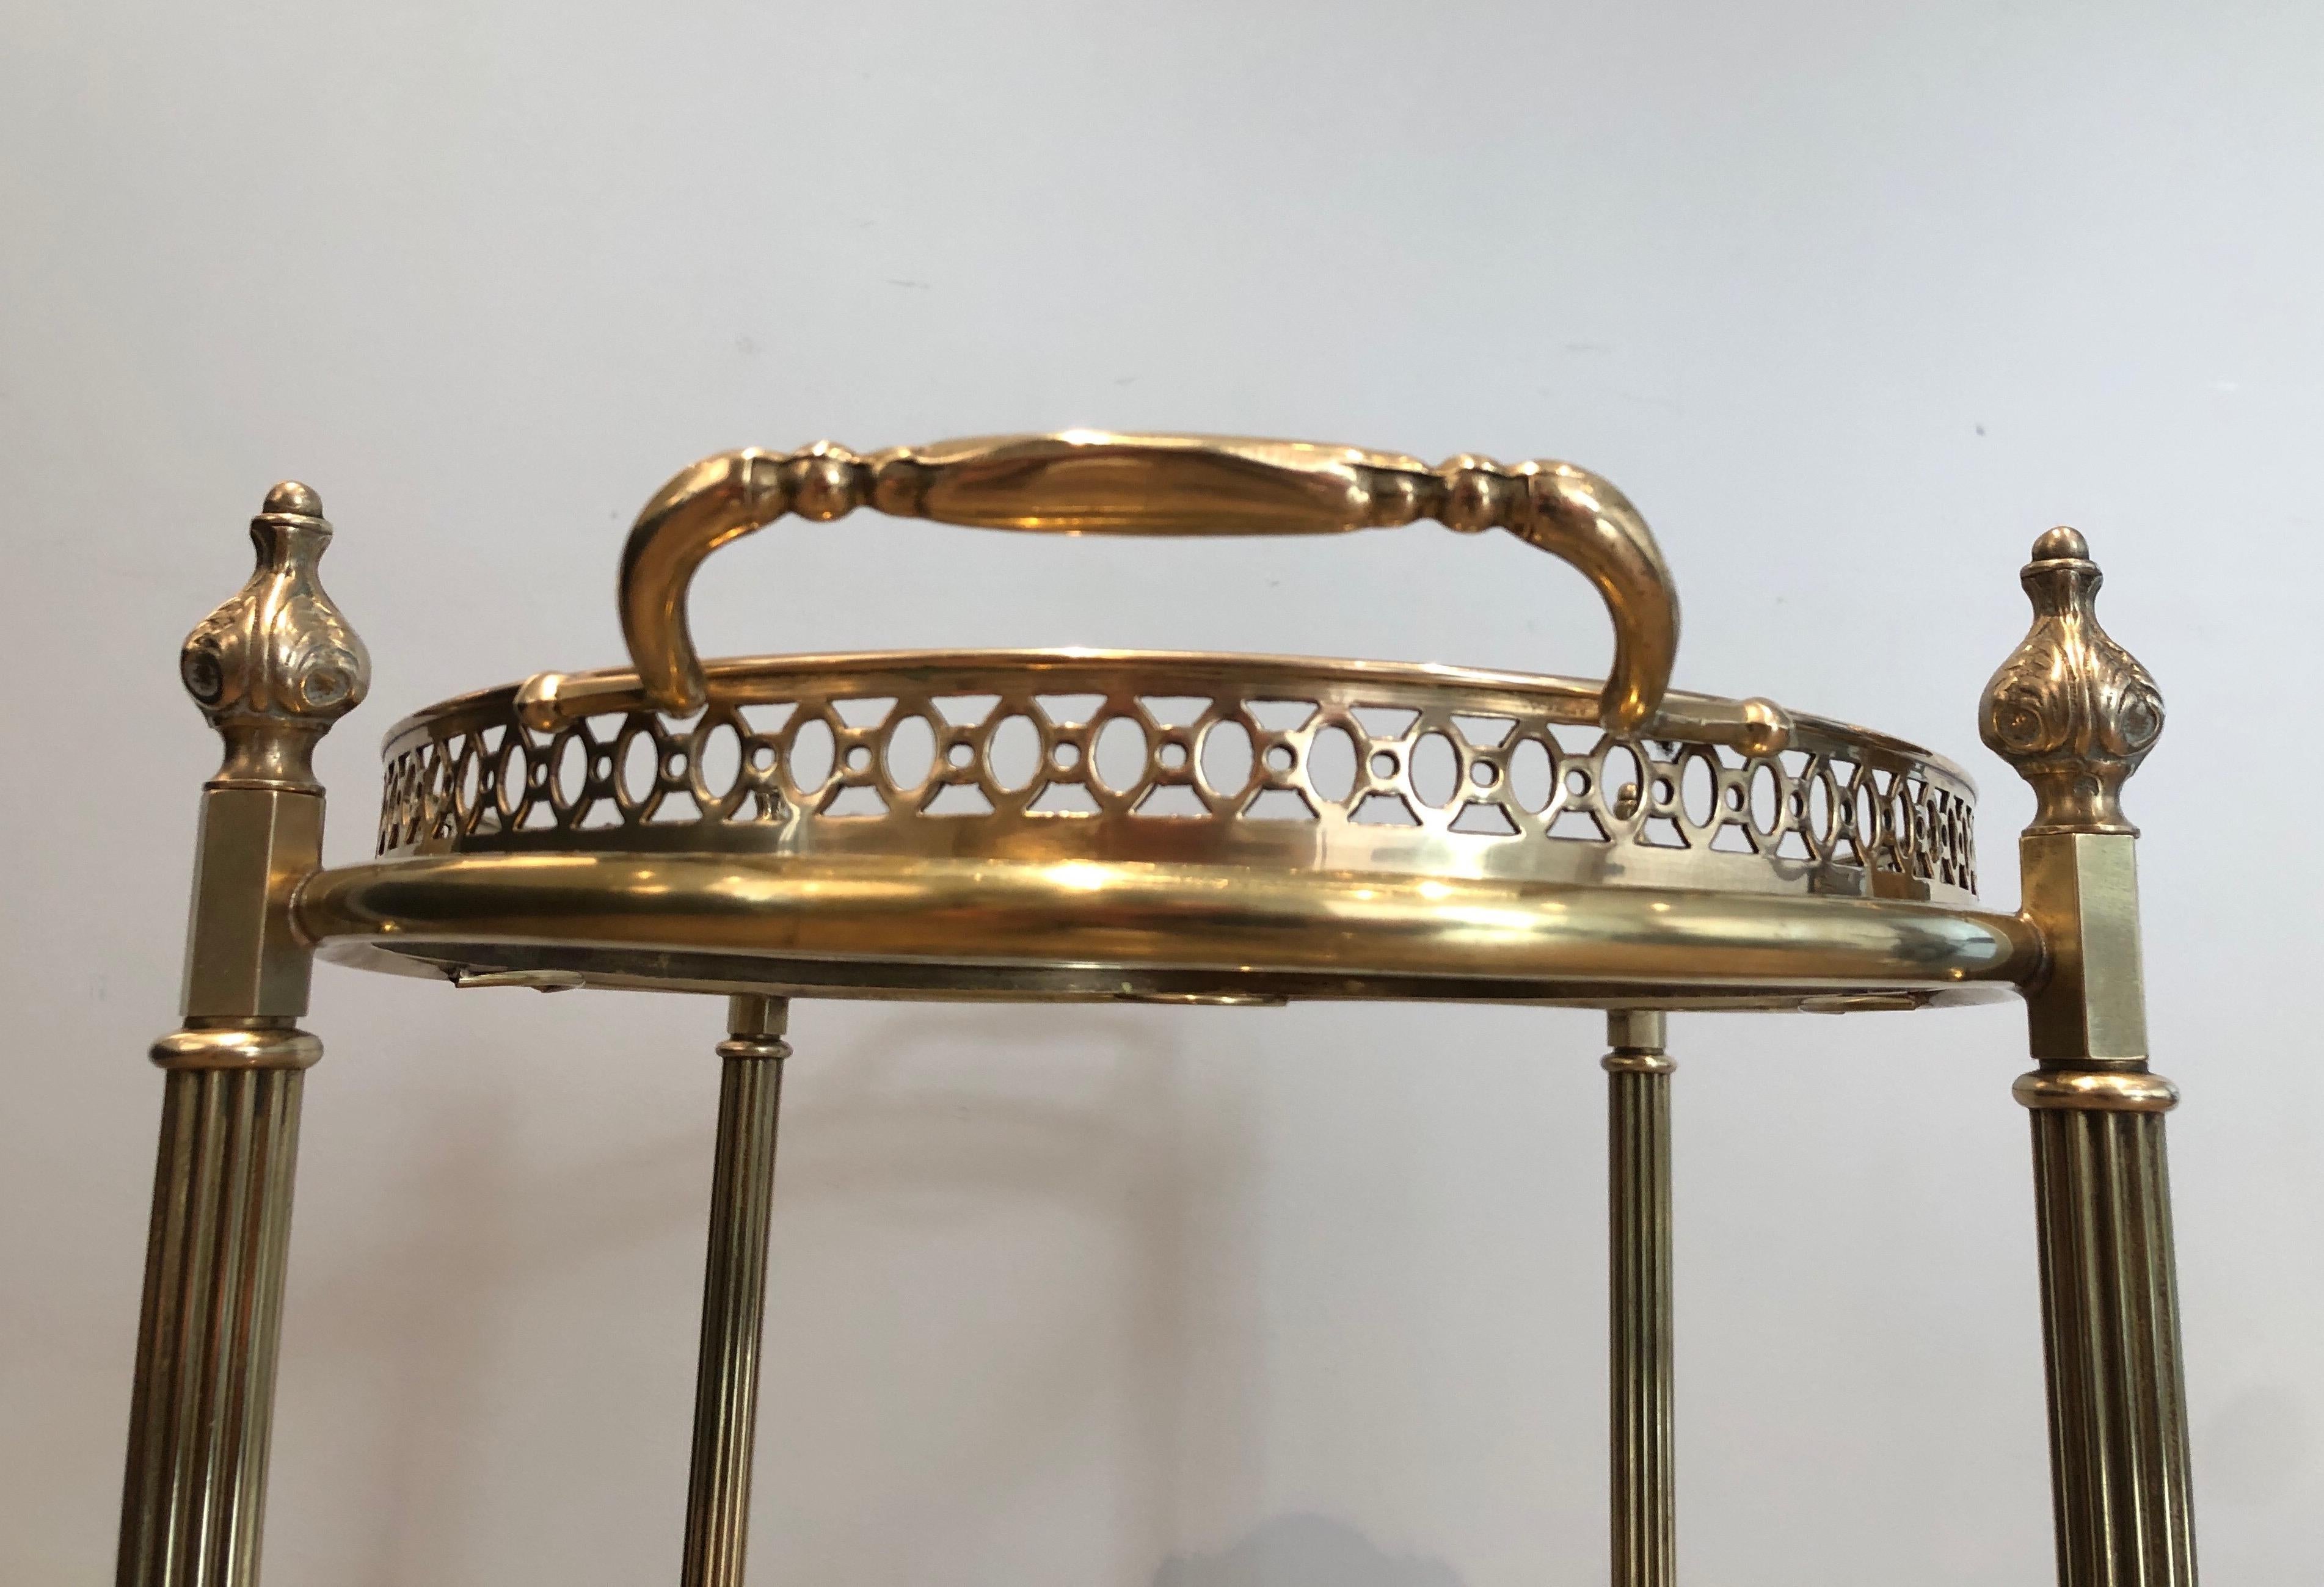 French Oval Brass Bar Cart with Removable Top Tray and Bottles Holder by Maison Jansen